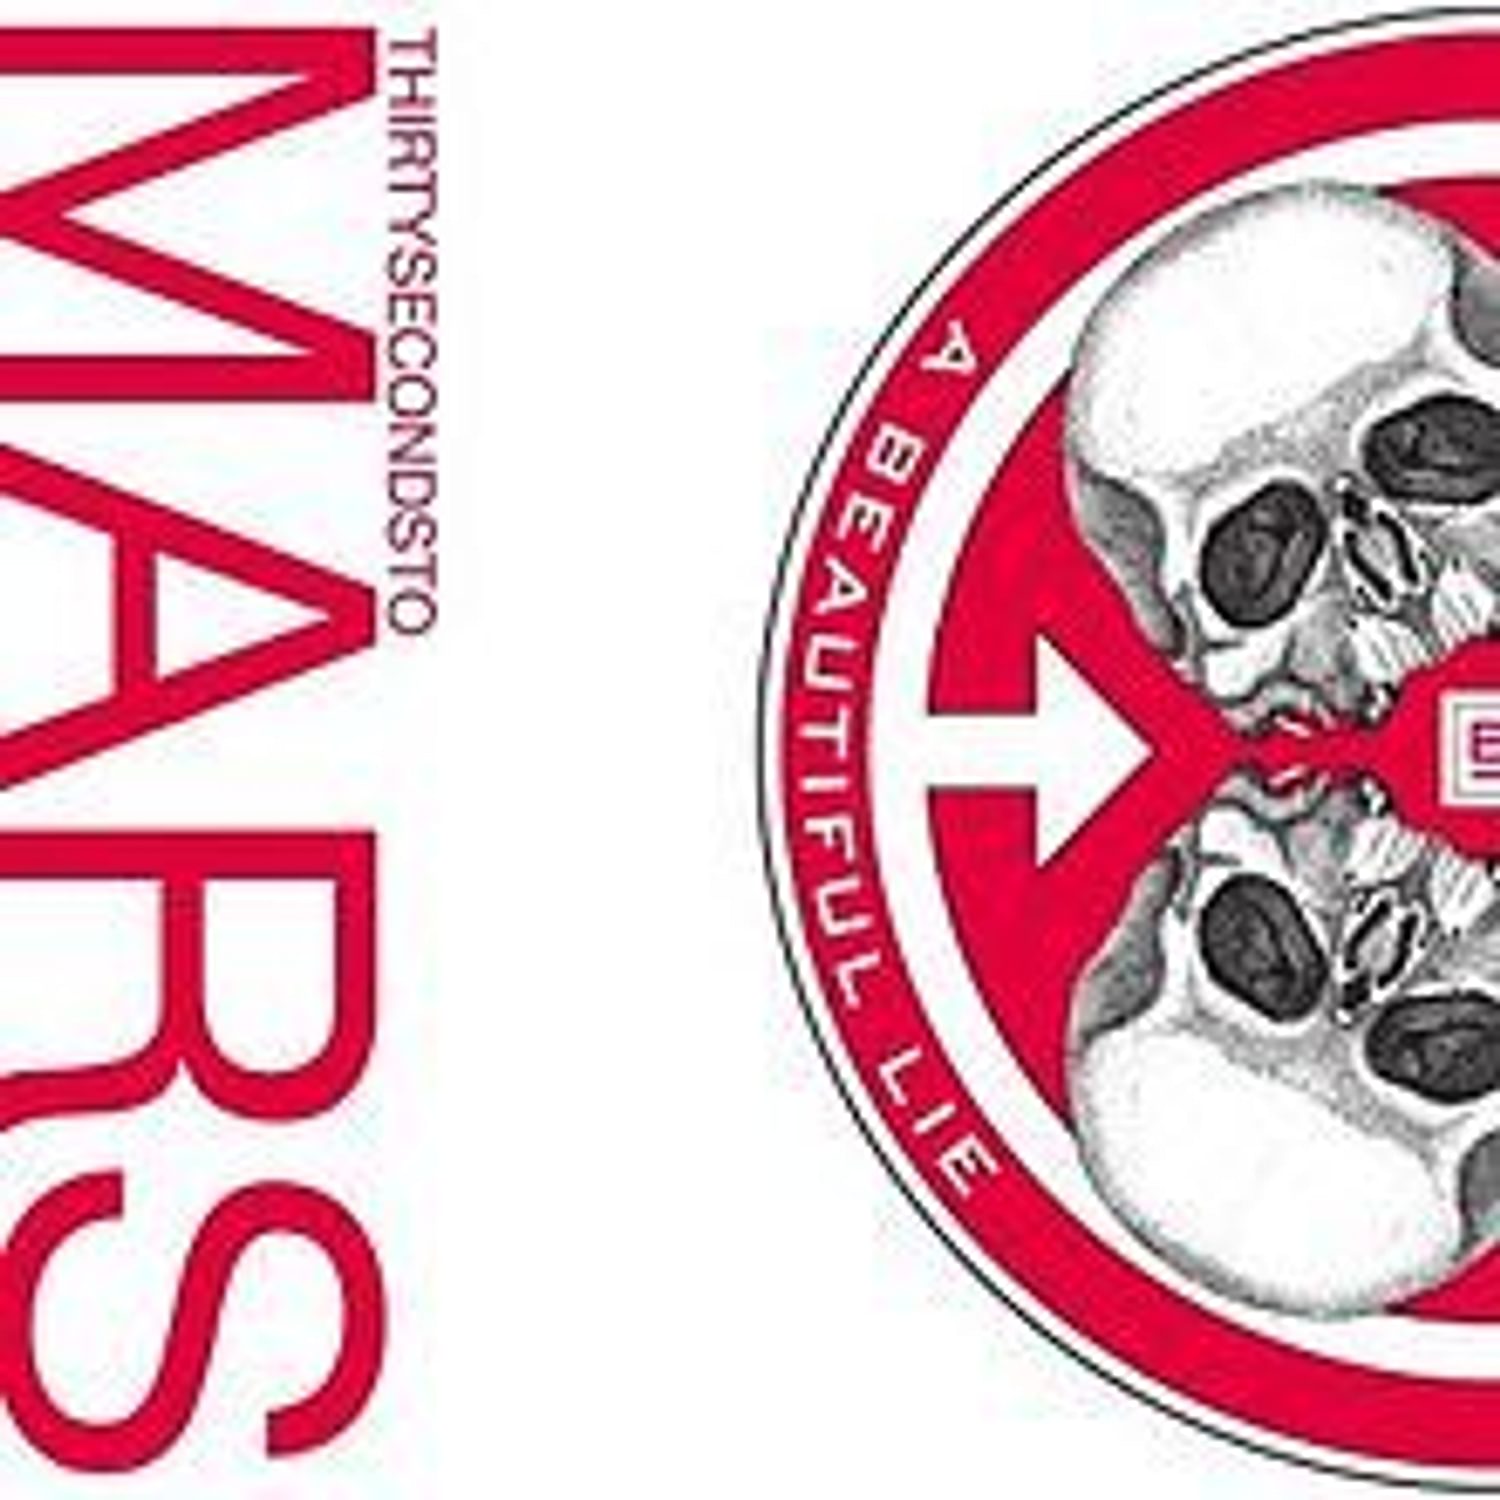 30 Seconds To Mars - A Beautiful Lie